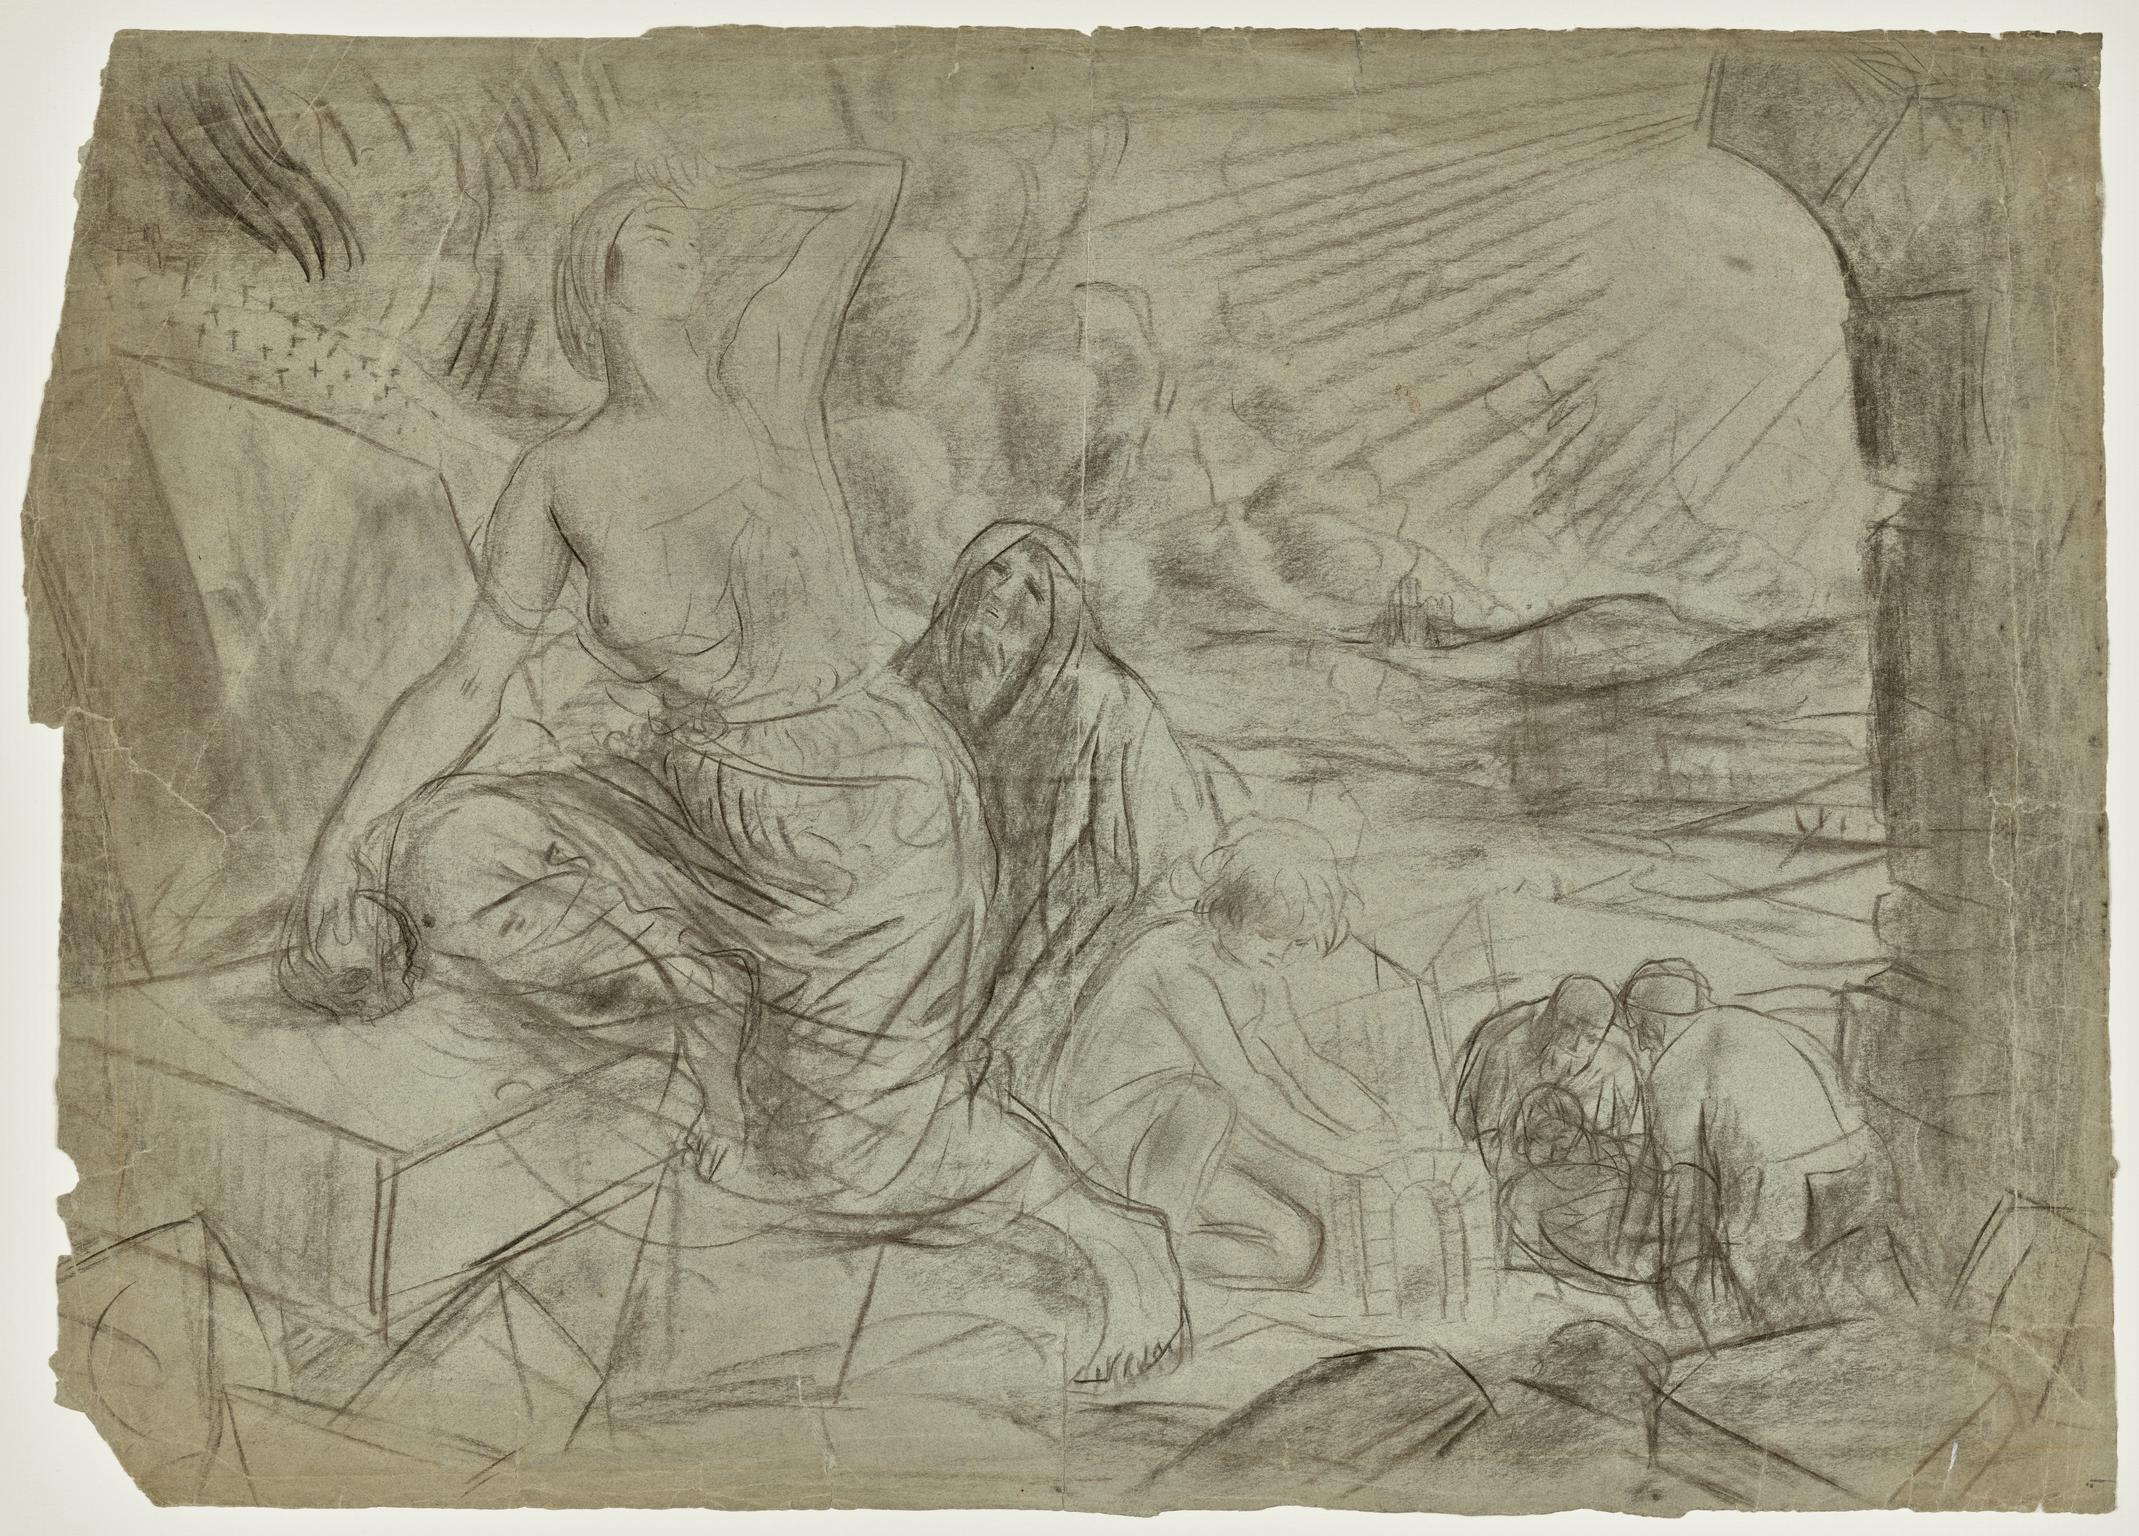 Allegorical Scene with Figures burying a Body